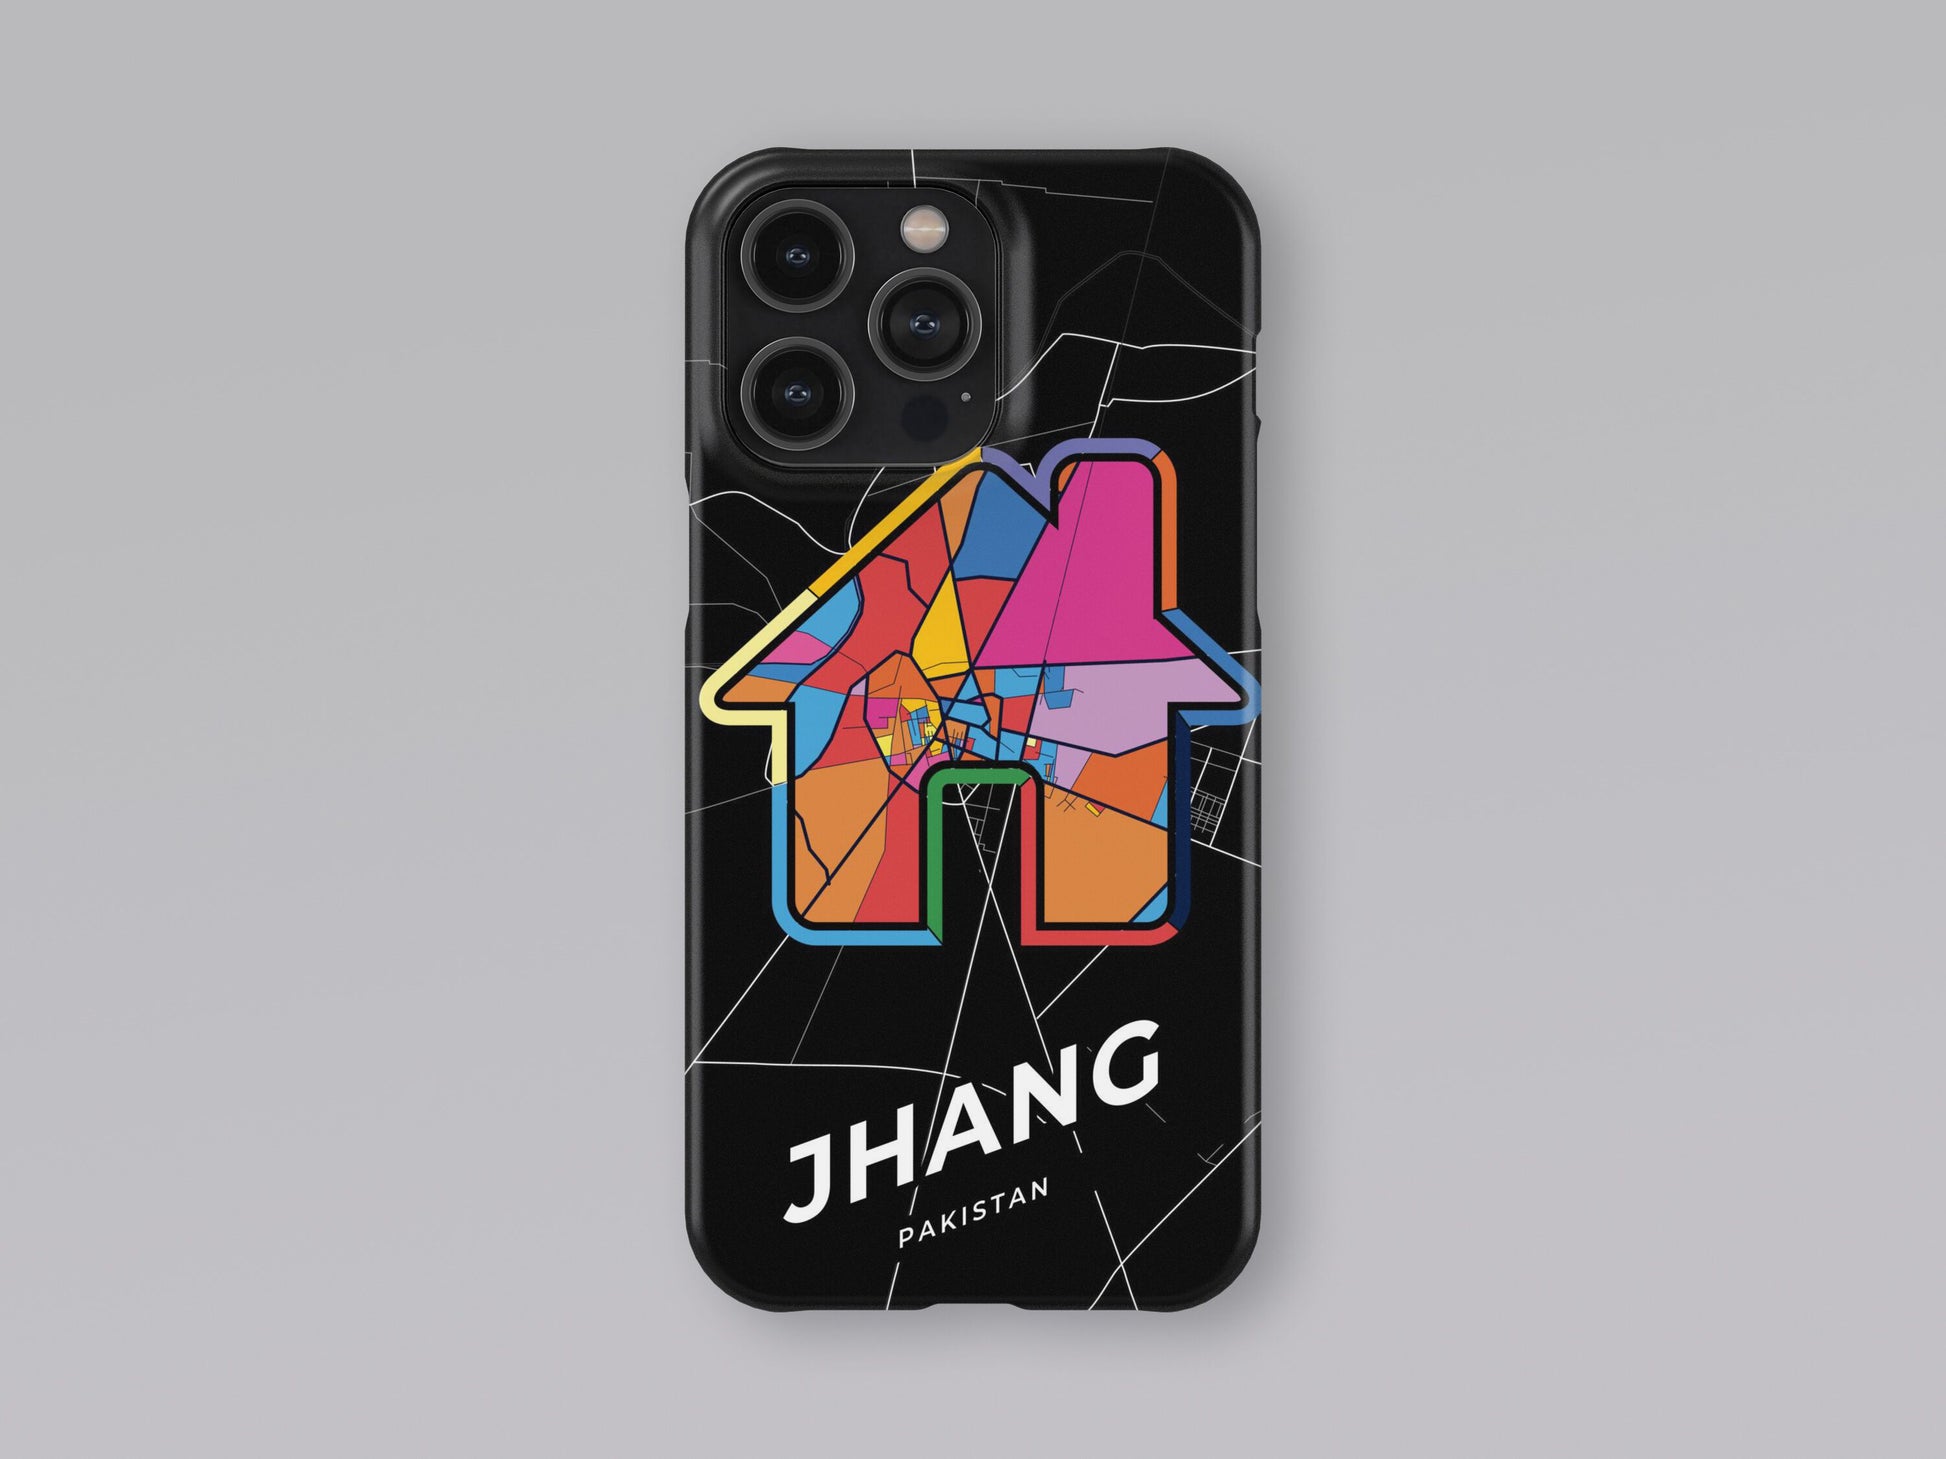 Jhang Pakistan slim phone case with colorful icon. Birthday, wedding or housewarming gift. Couple match cases. 3